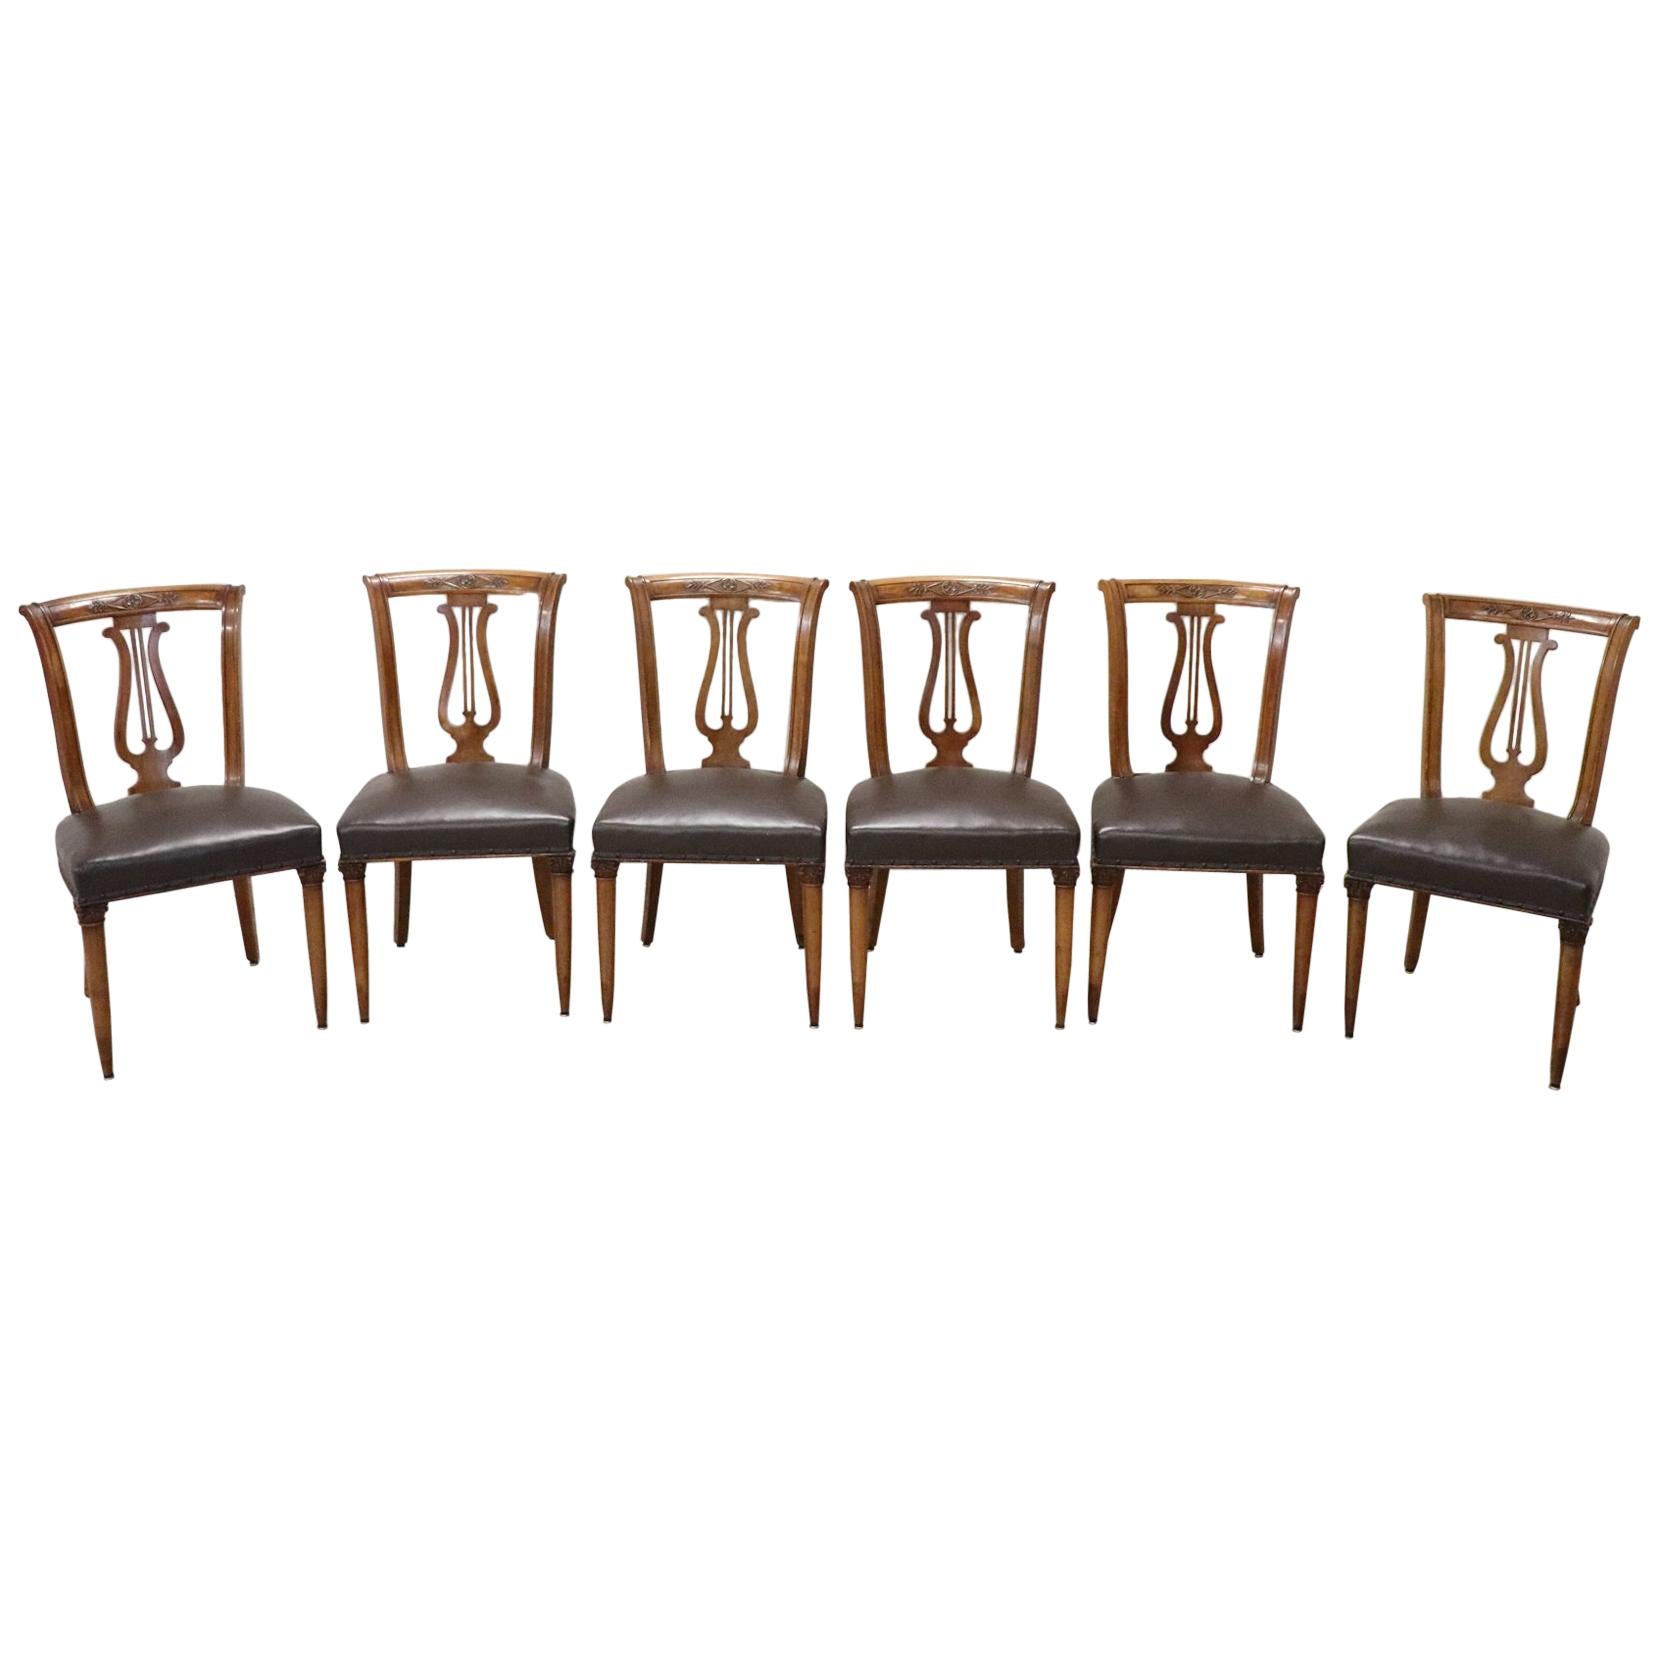 20th Century Italian Neoclassical Style Walnut Carved Set of Six Chairs